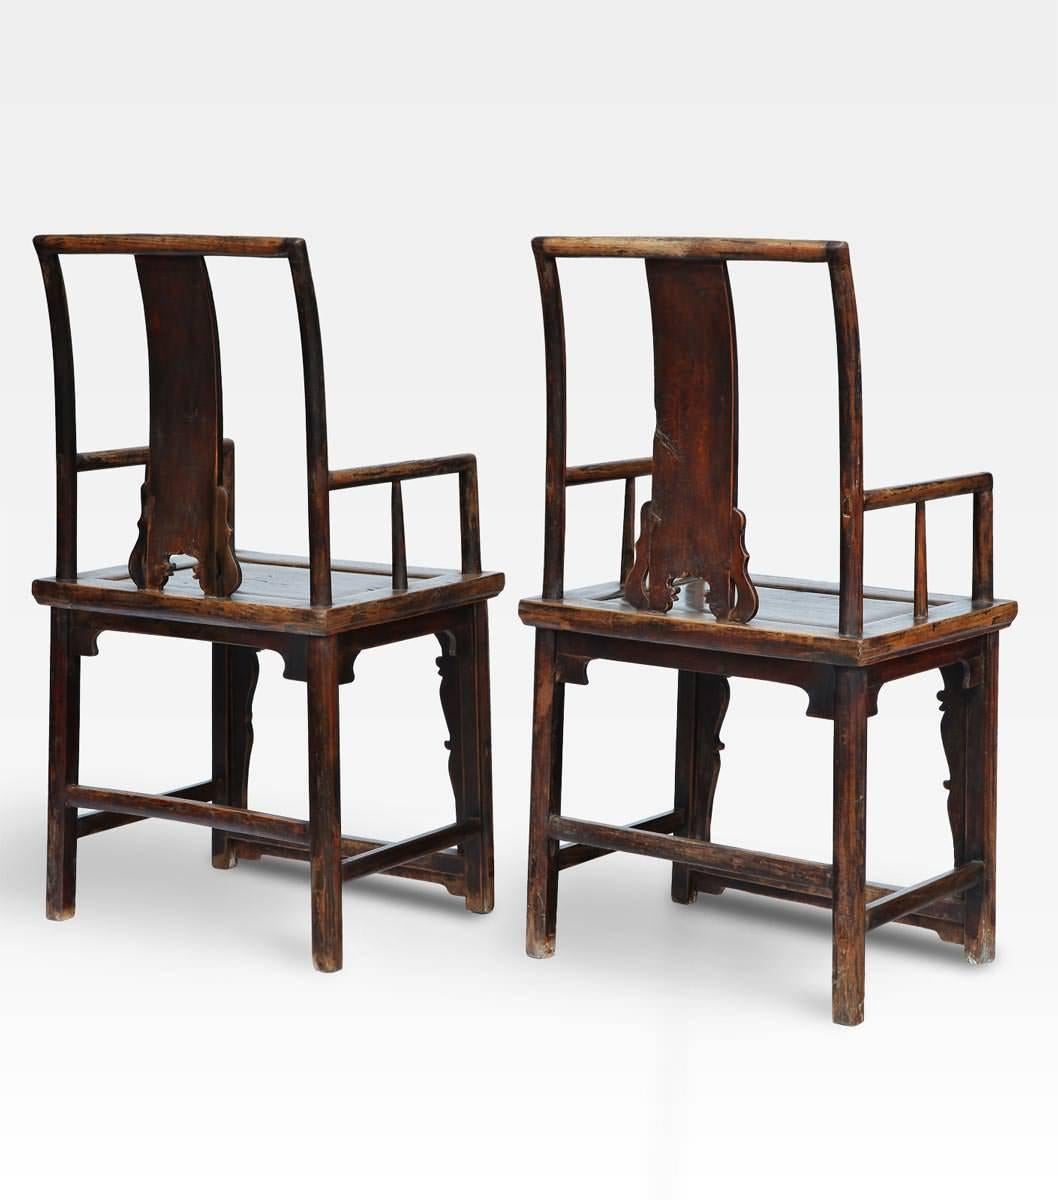 Pair of Chinese chairs made of precious elm wood. The perfect balance between minimal deign and the sinuous lines of the round carved friezes, creating a couple of chairs with an aesthetic impact like no other. The seatback is finely carved and